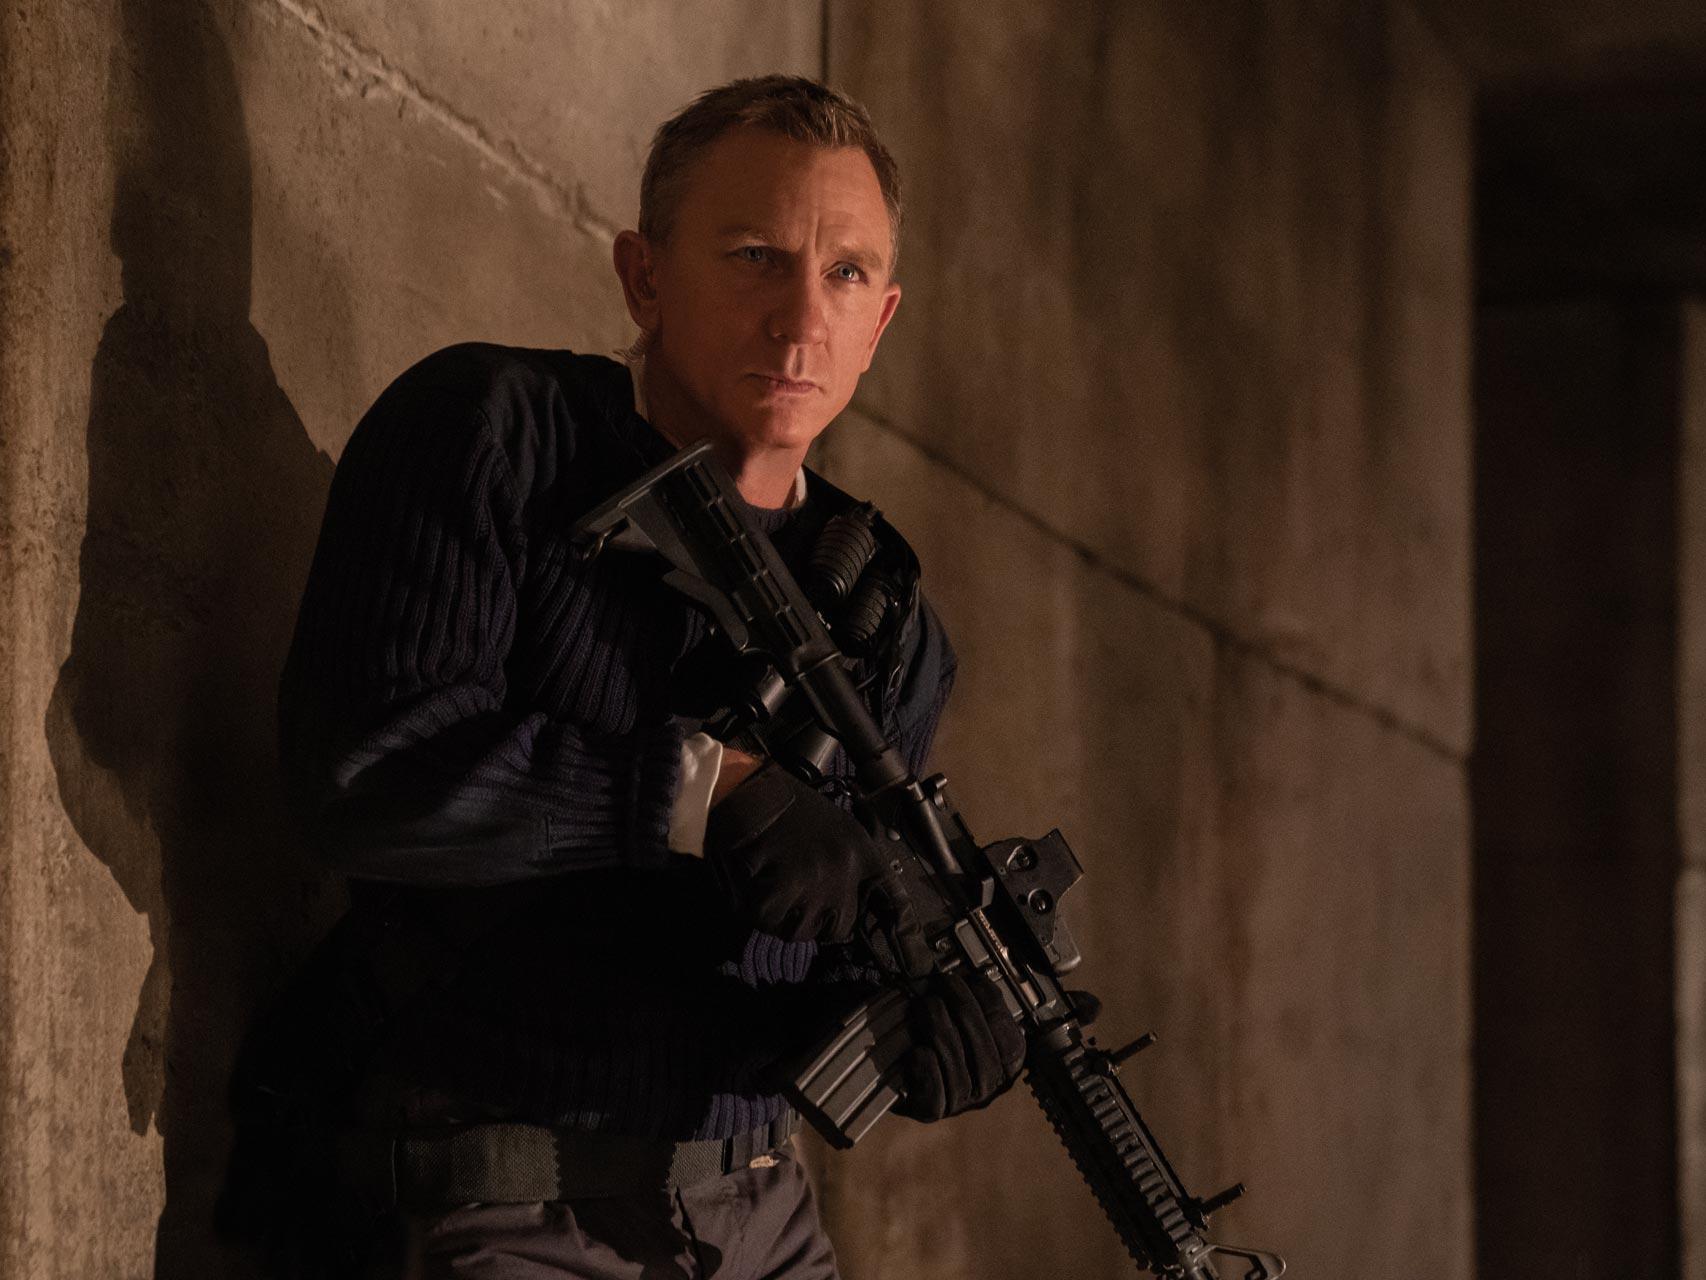 Daniel Craig returns as 007 in the latest franchise instalment, ‘No Time to Die’